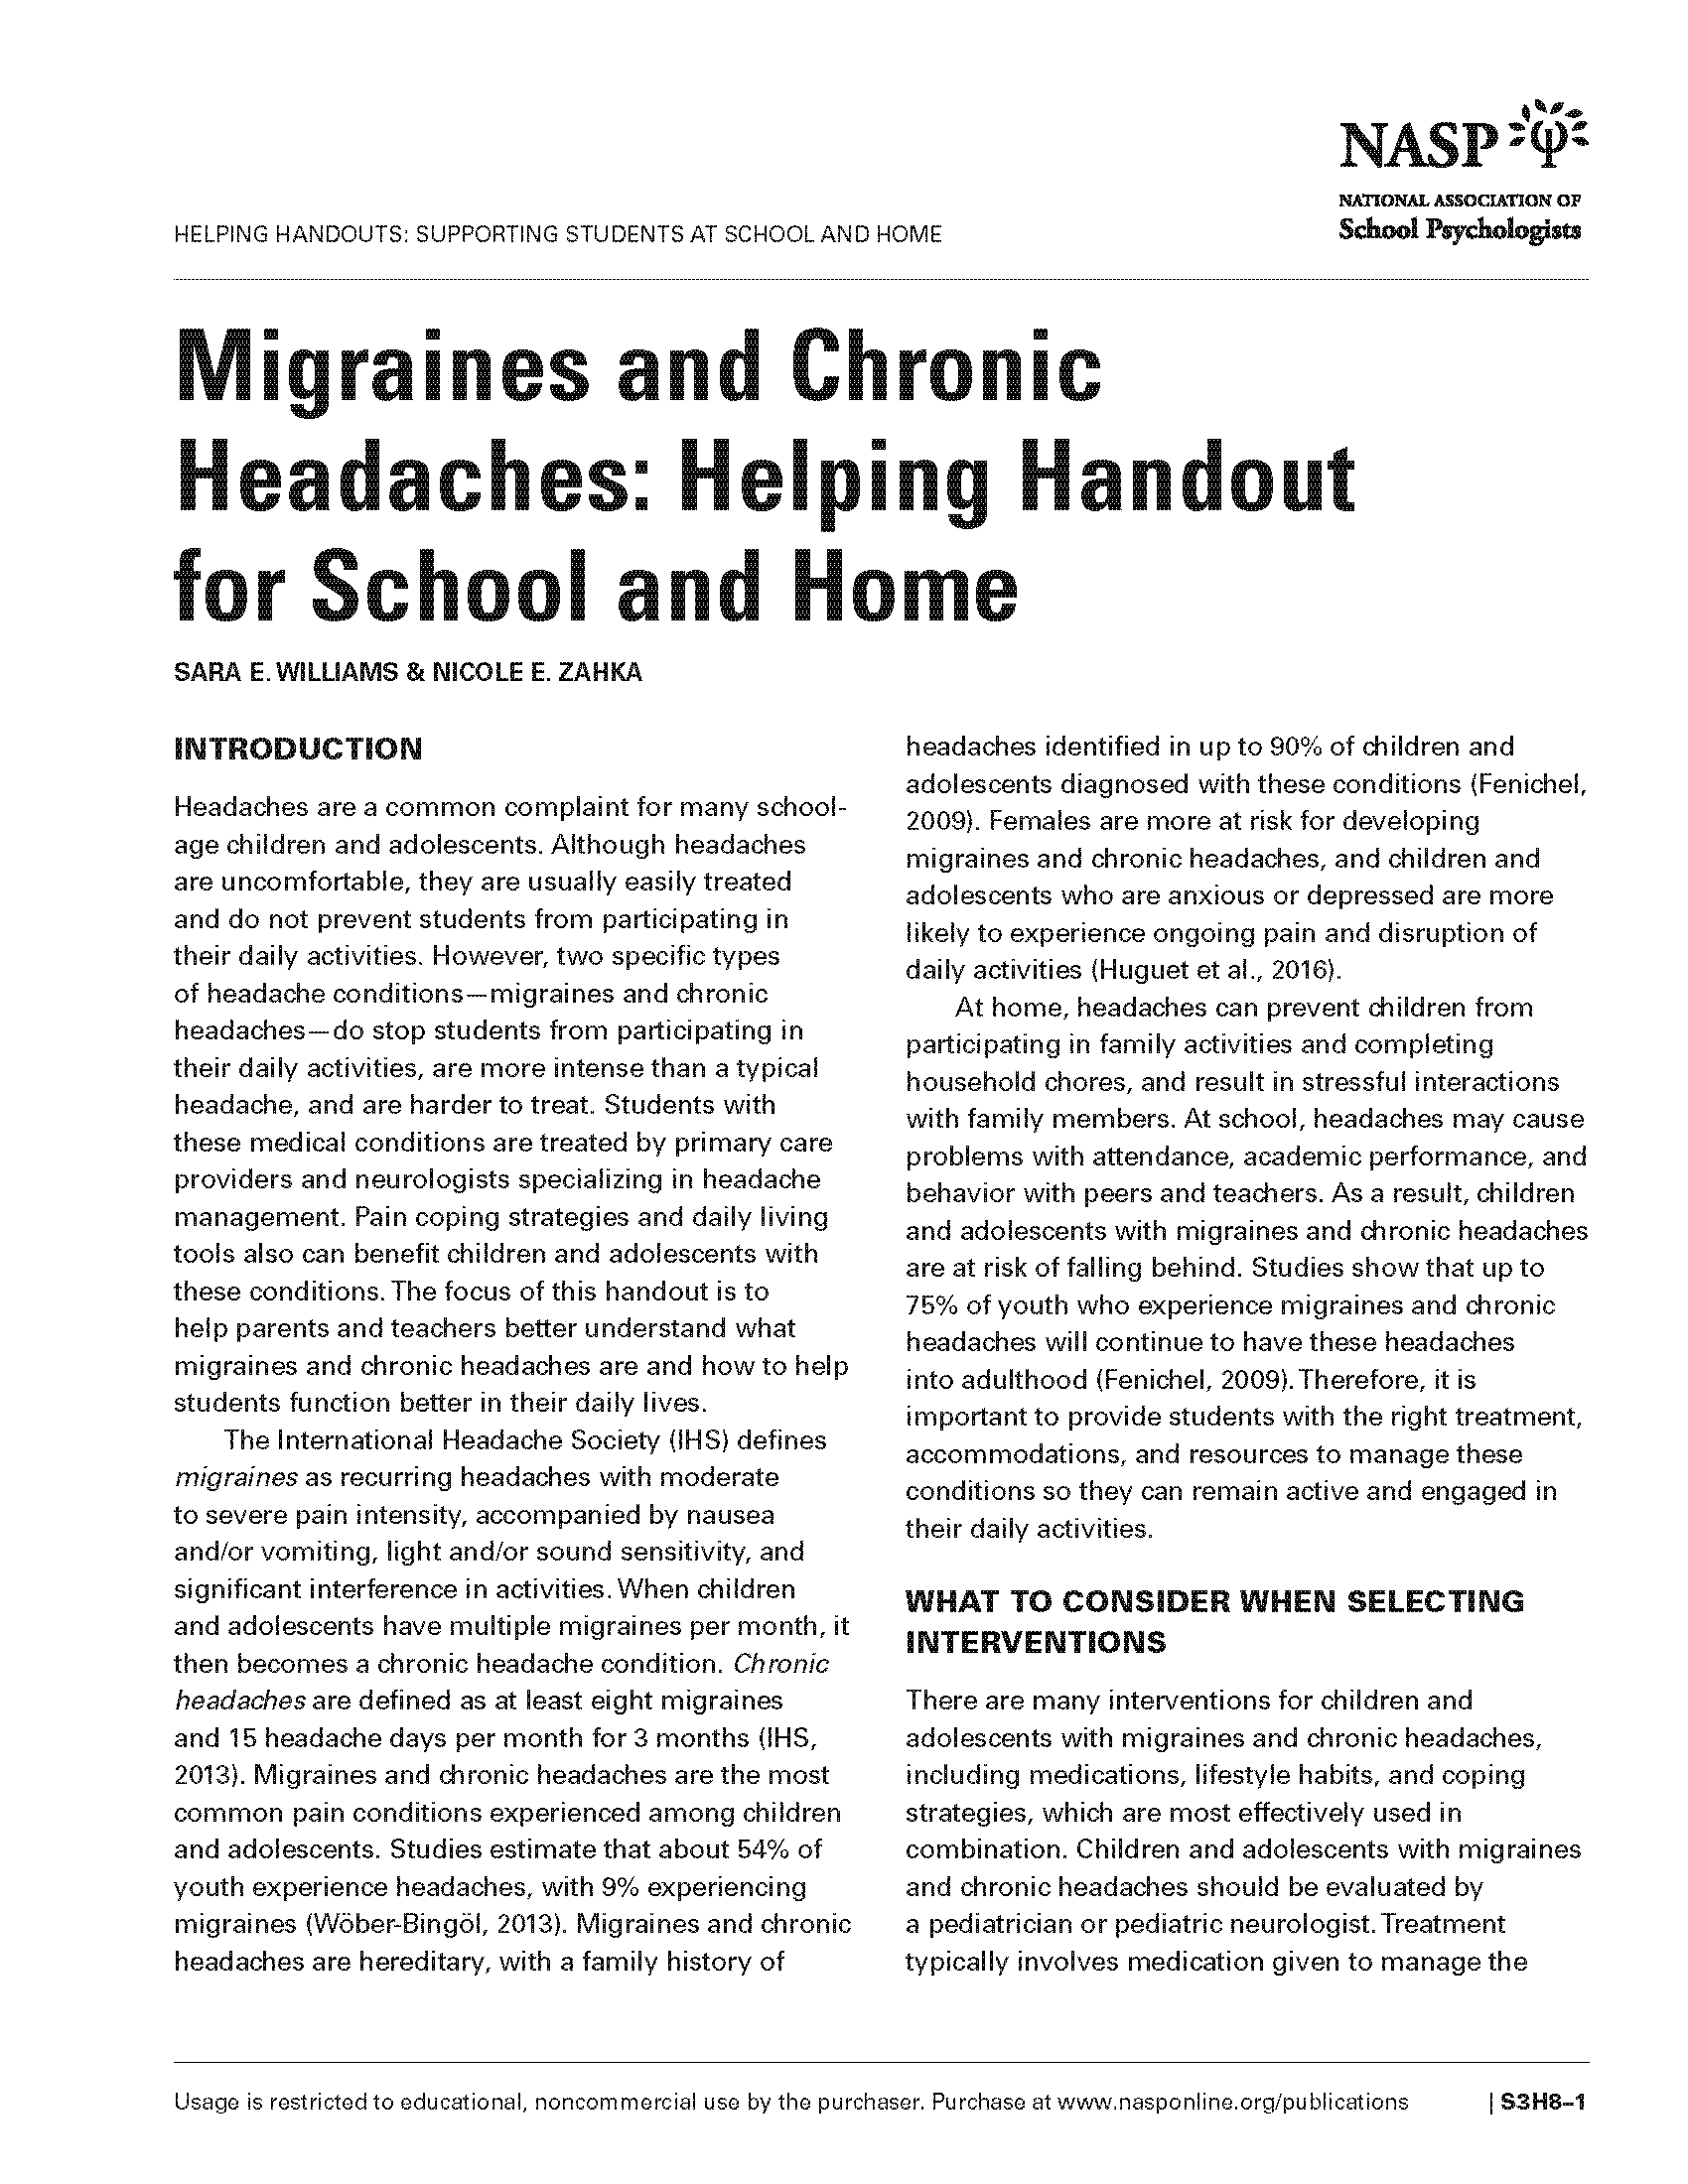 Migraines and Chronic Headaches: Helping Handout for School and Home